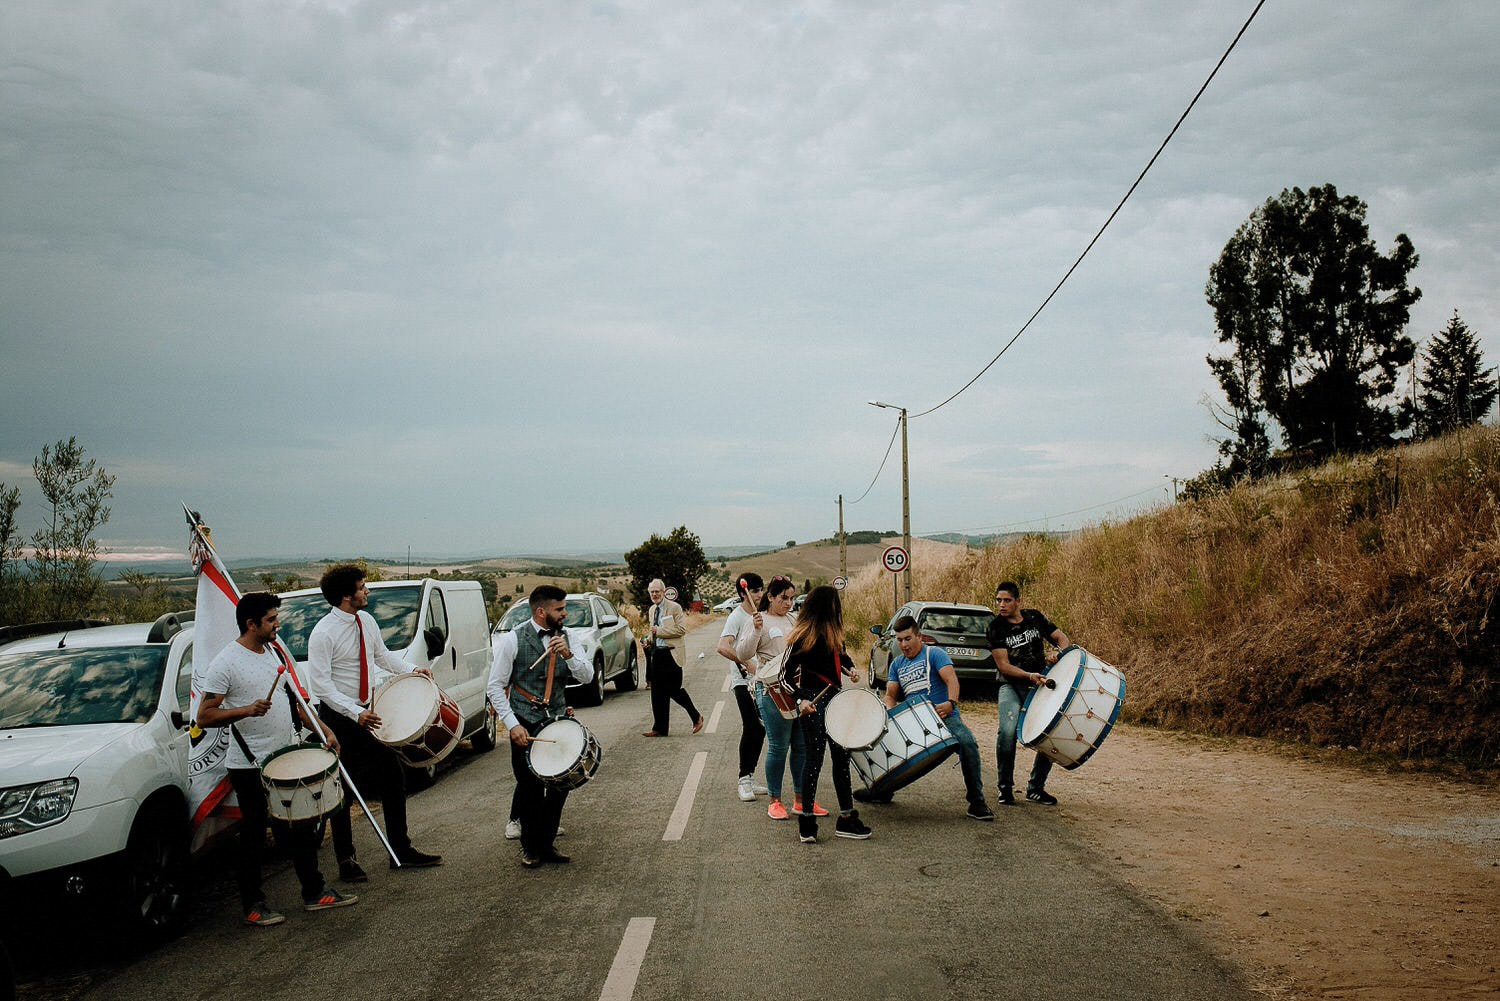 Charming Destination Wedding in the Portuguese Countryside - local village band playing on the drums in the middle of the road